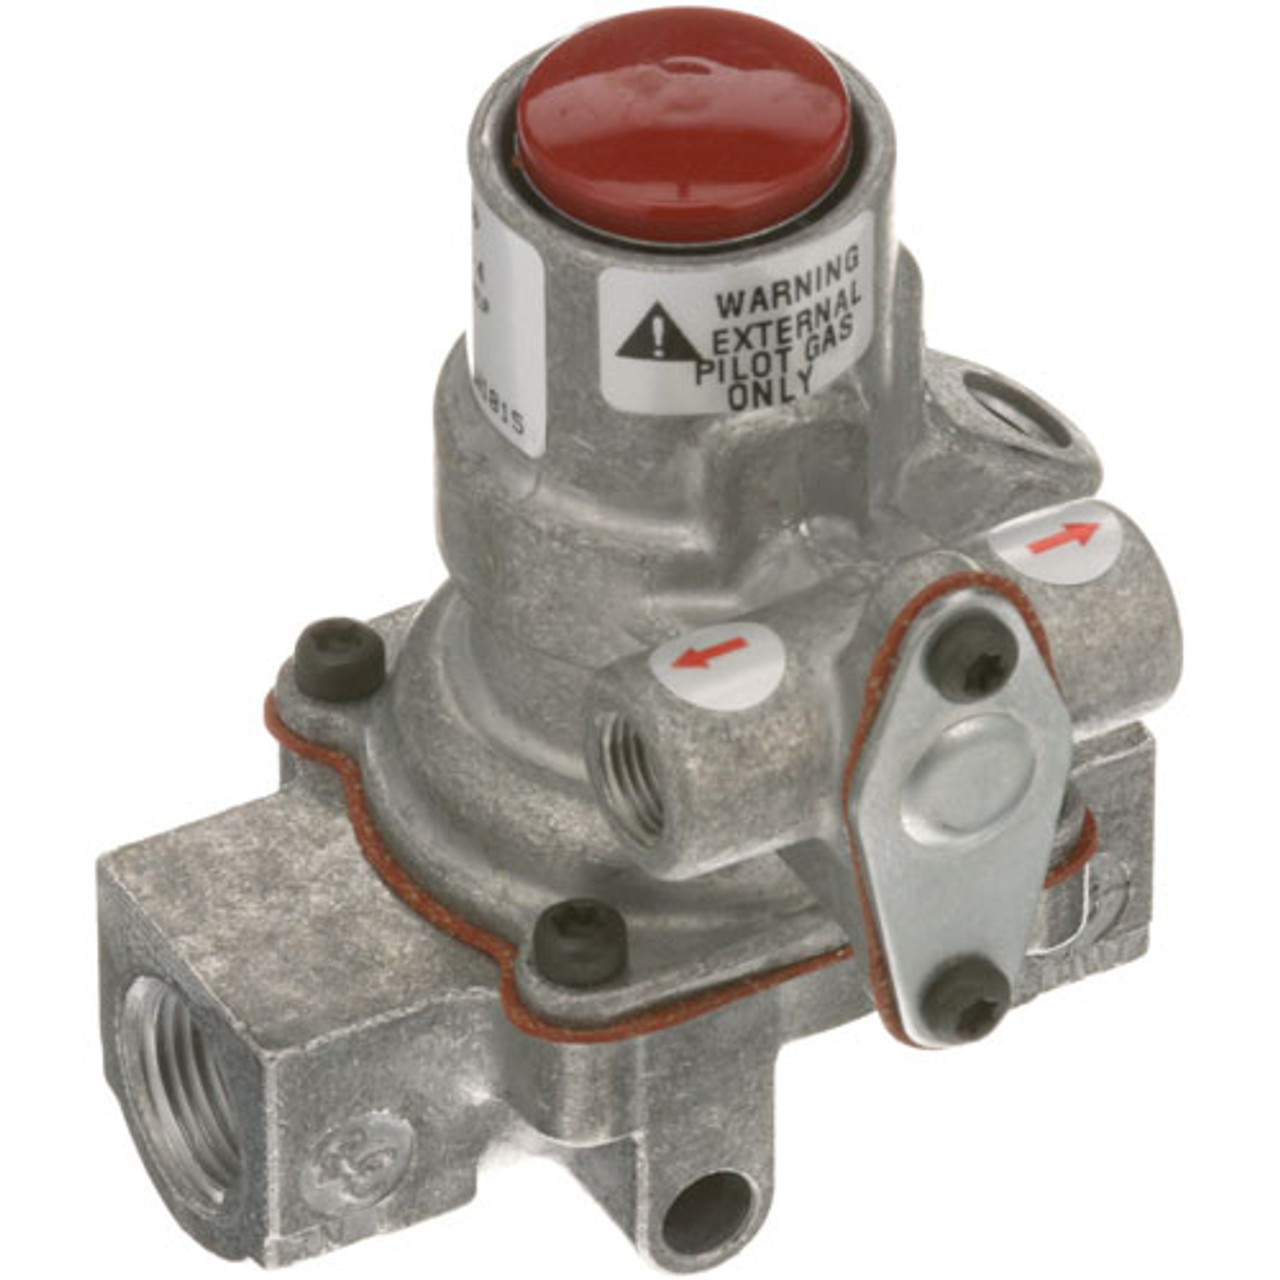 Safety Valve - Baso - Replacement Part For Vulcan Hart 962067-2